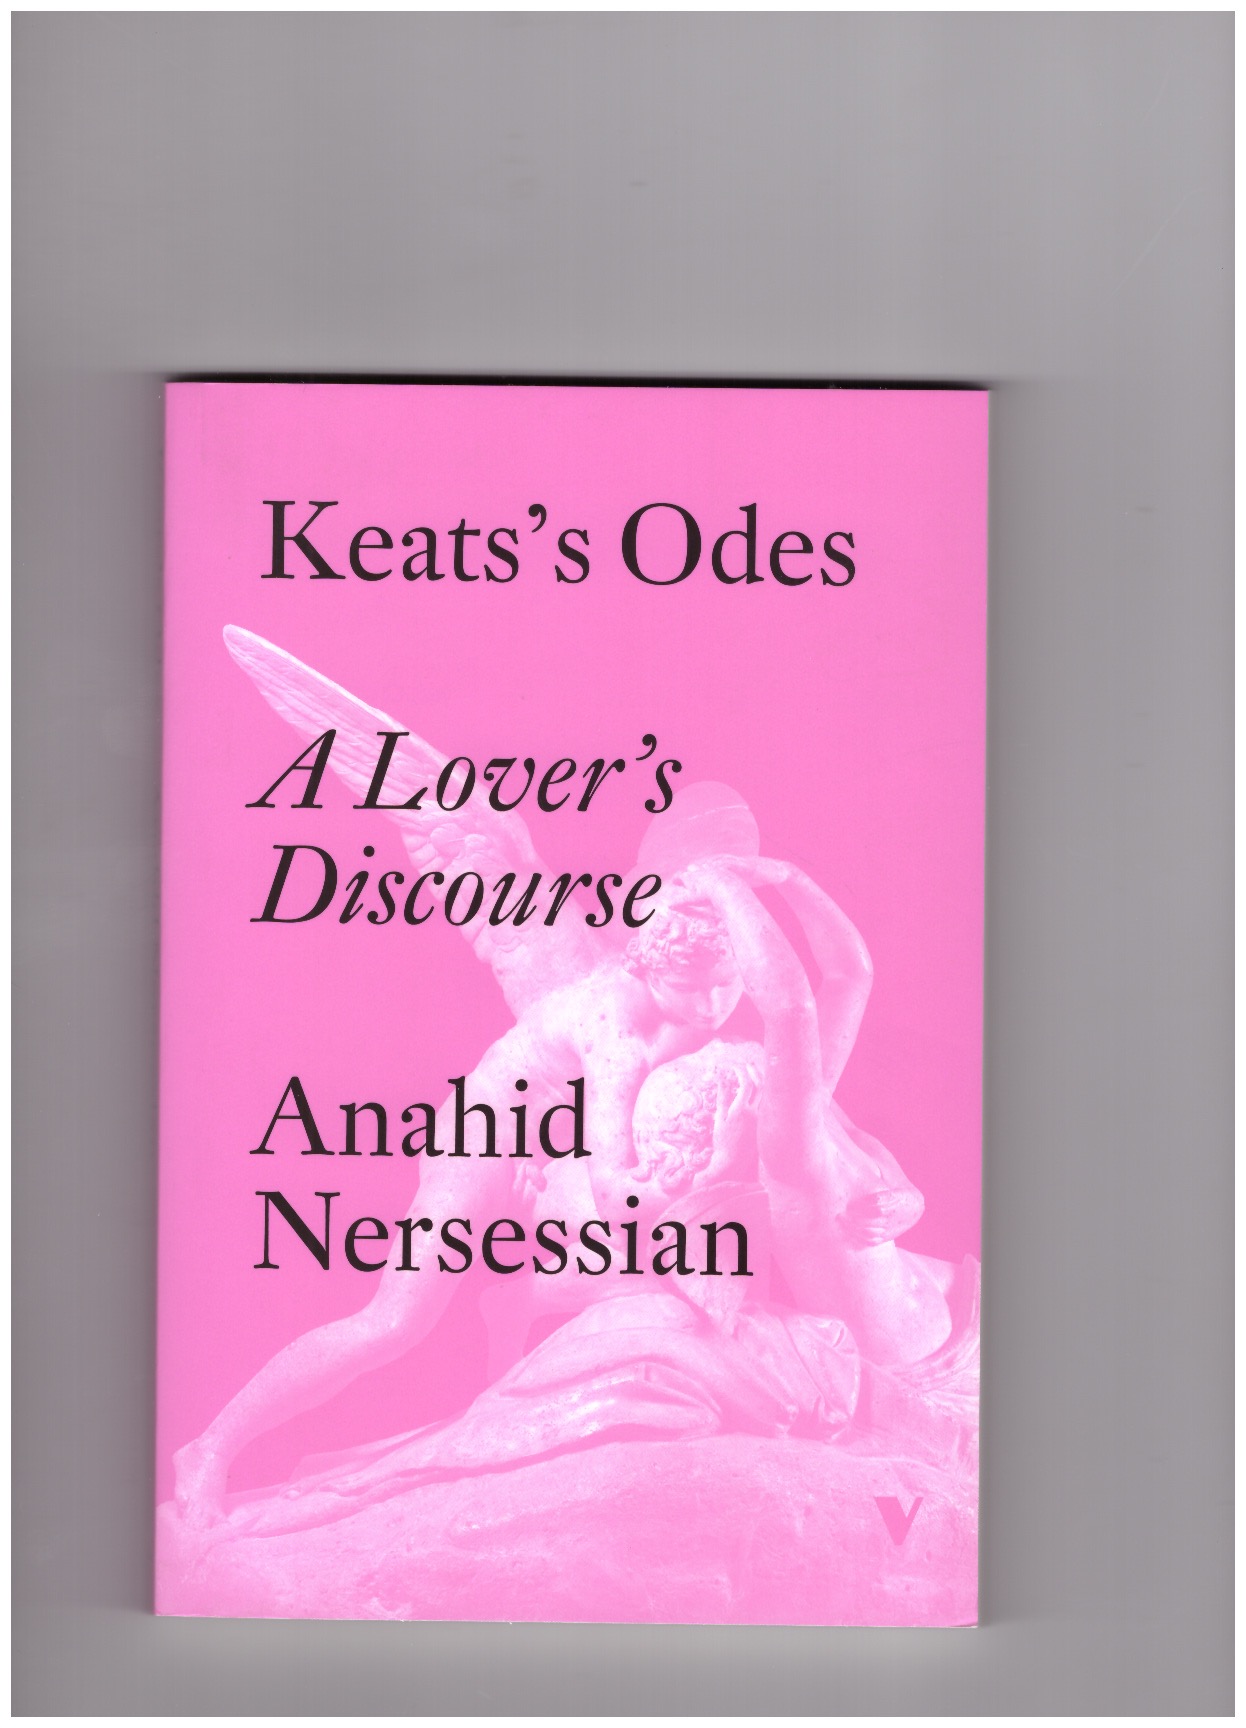 NERSESSIAN, Anahid - Keats’s Odes. A Lover’s Discourse